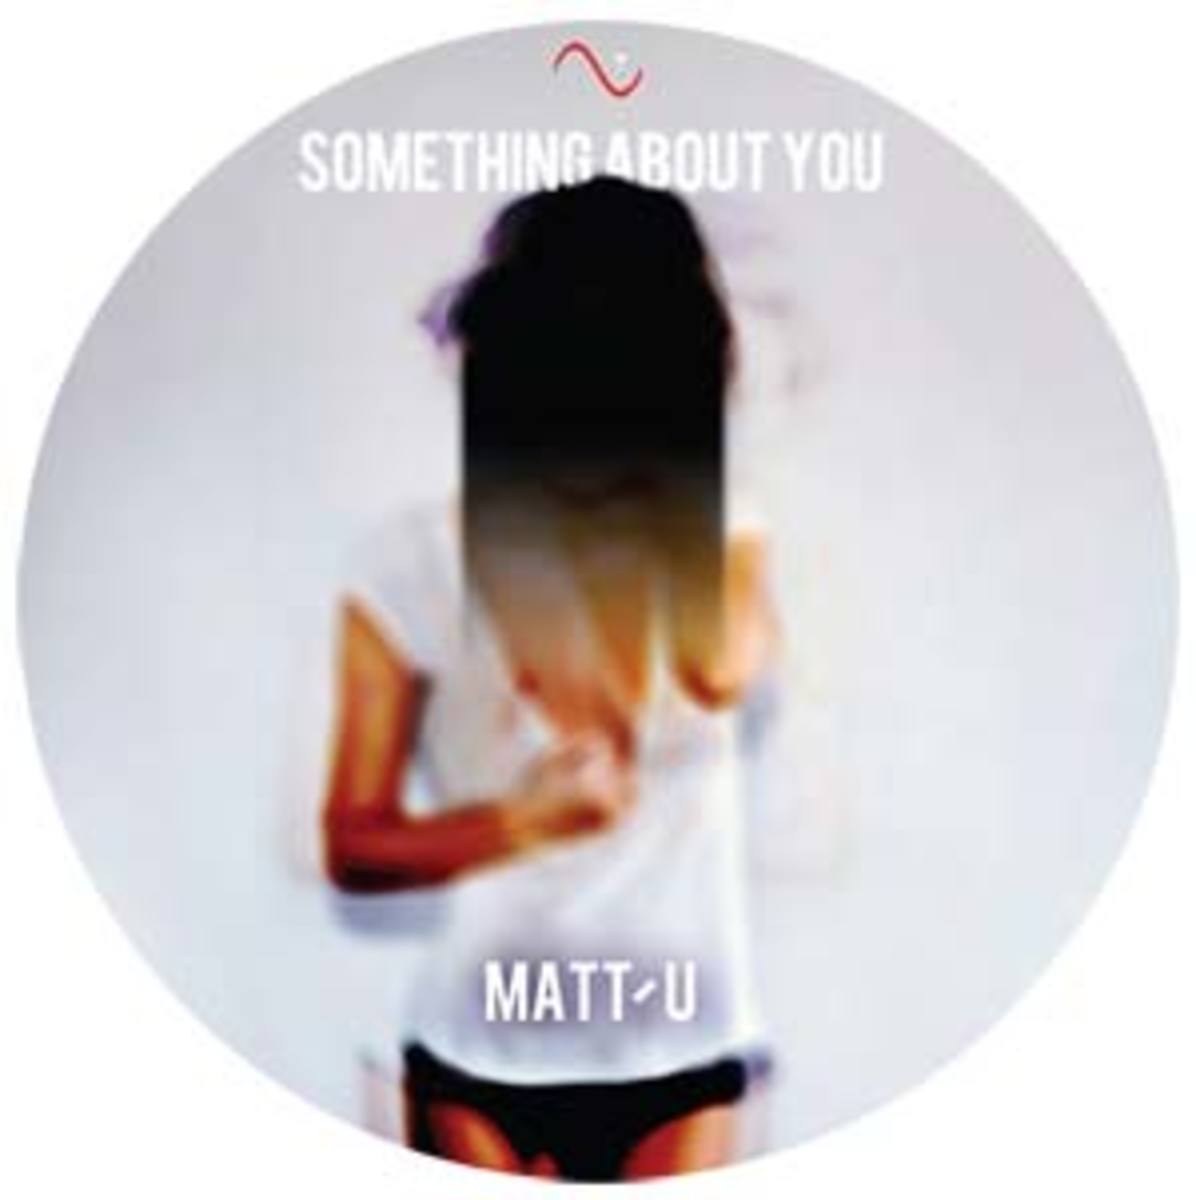 Review: Matt-U “Something About You” via NoMad Records